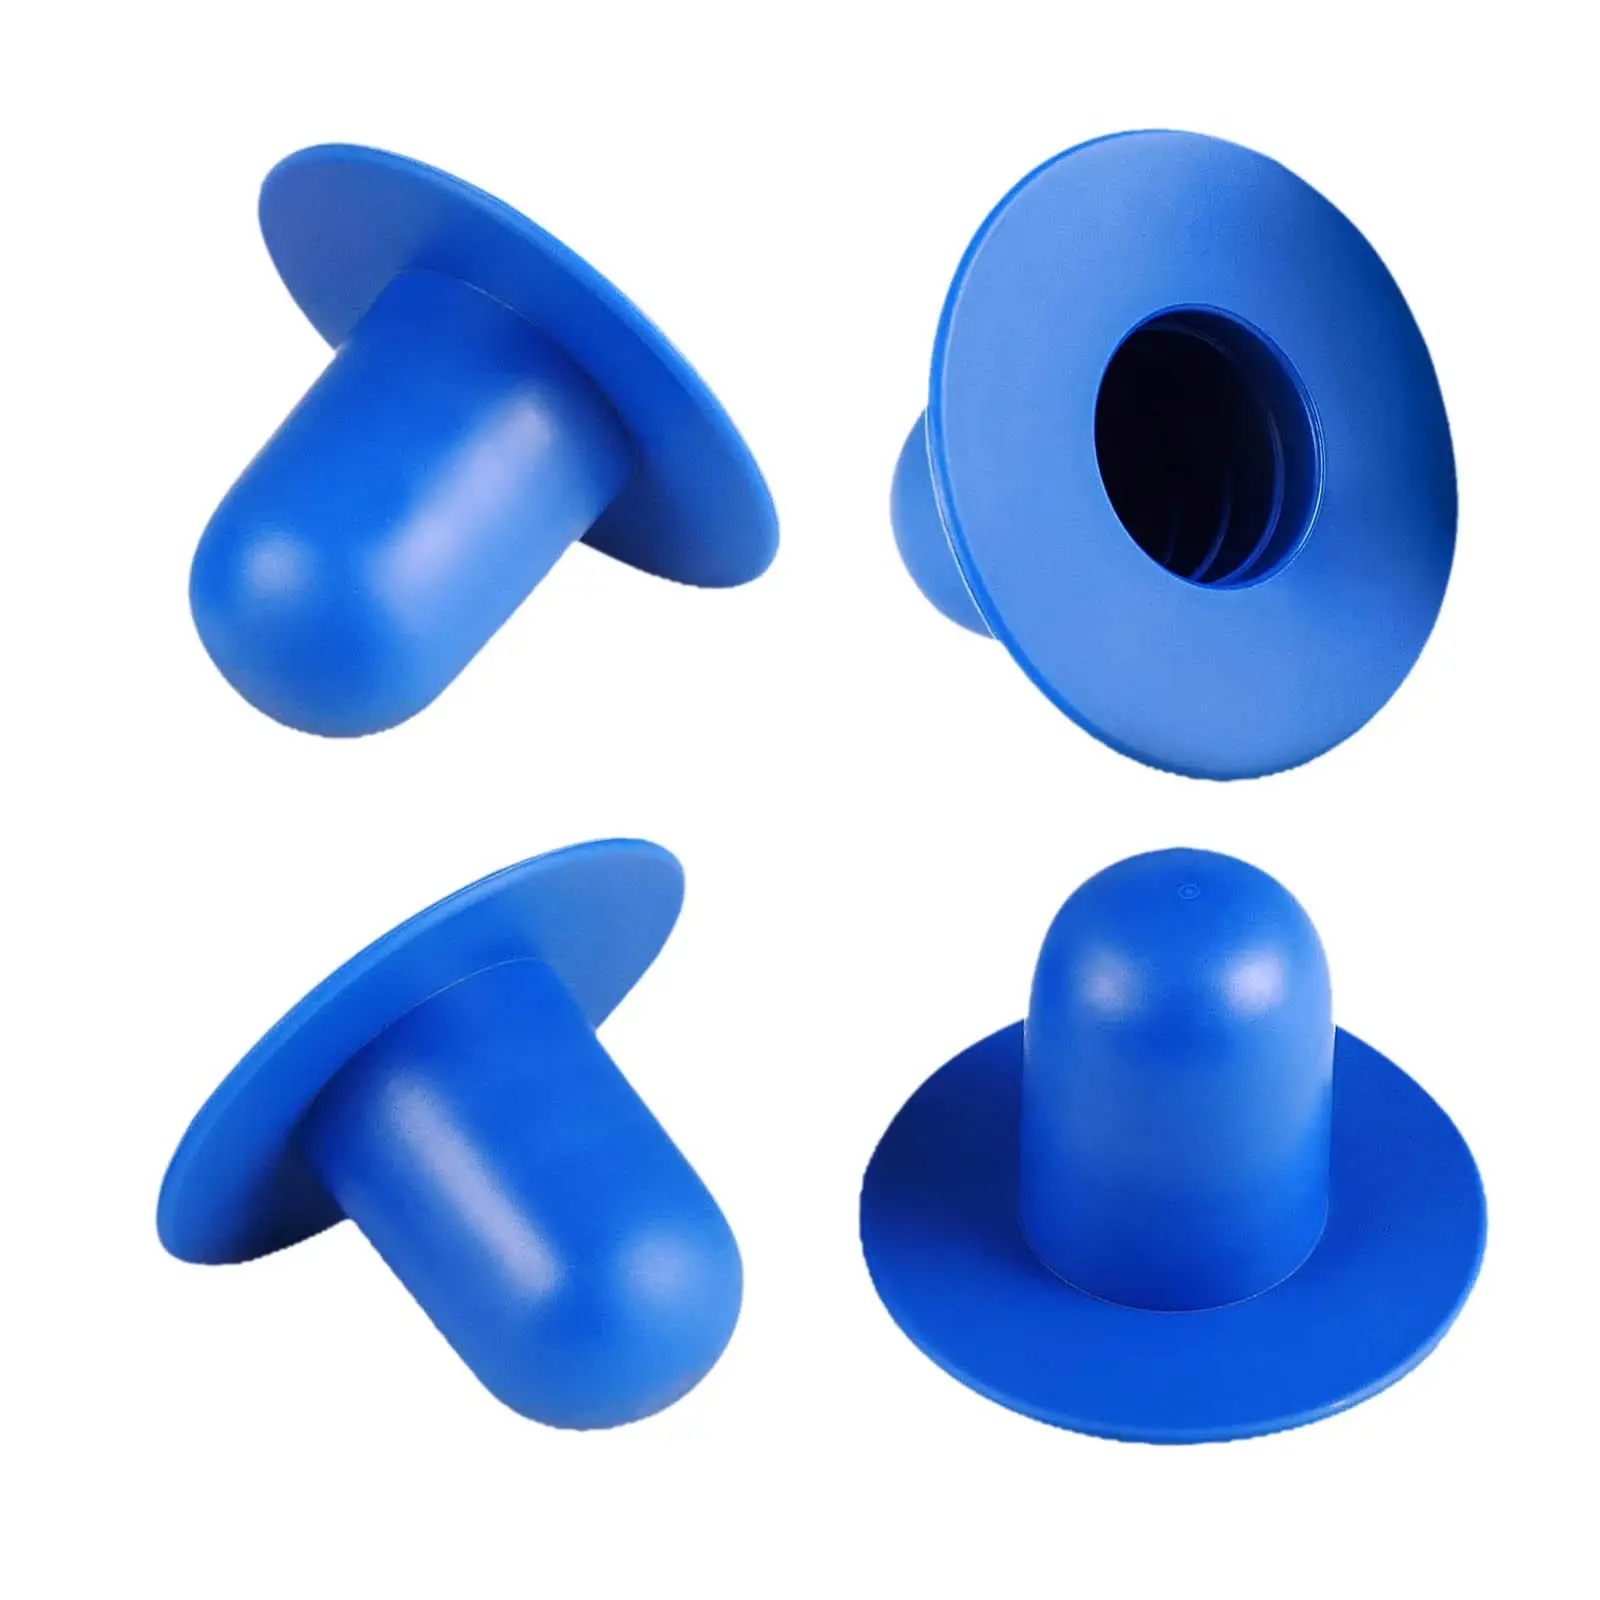 4x above Ground Swimming Pool Plugs Accessories Filter Pump Stopper Strainer Hole Plug PVC for Intex Wall Plug